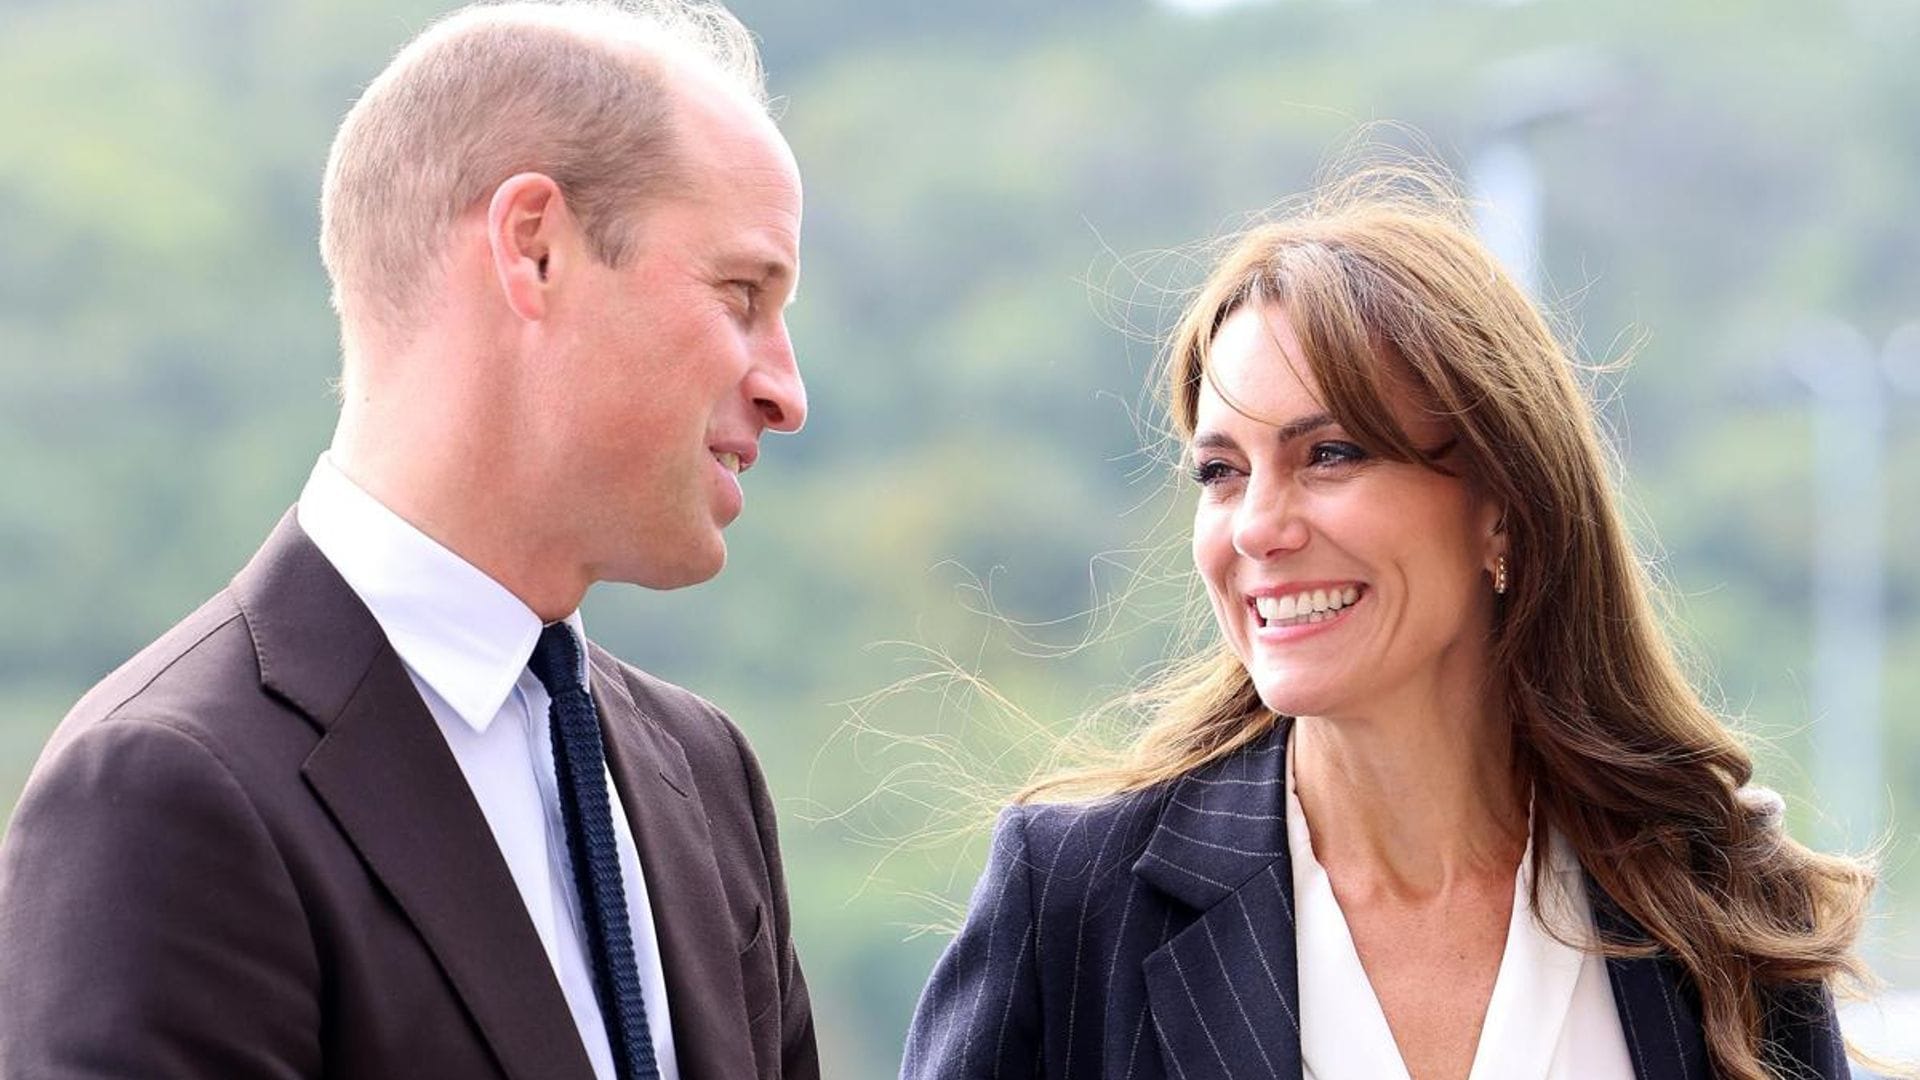 Prince William promises to 'look after' wife Catherine as he returns to public duties